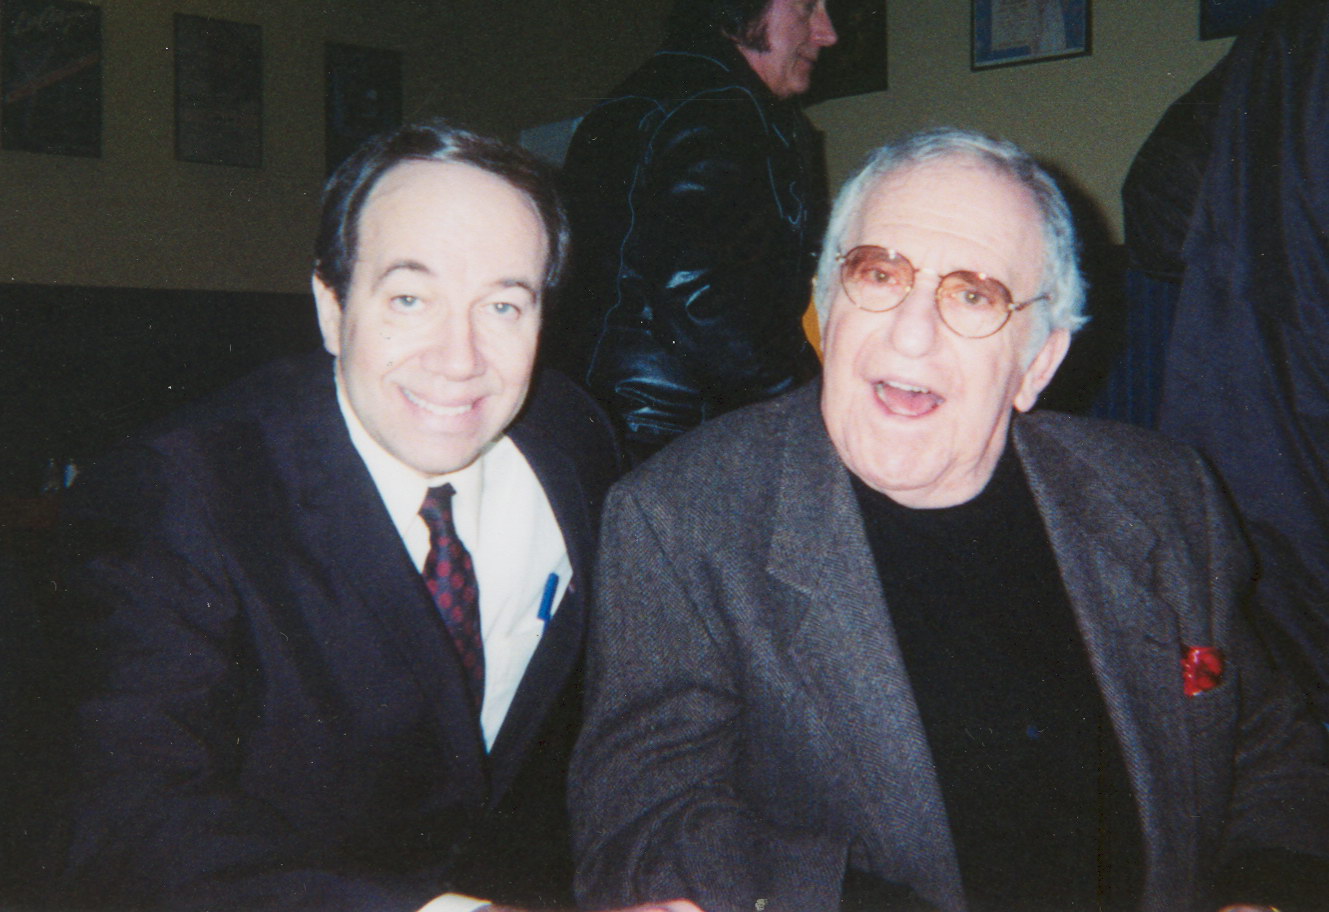 Michael Townsend Wright and Soupy Sales